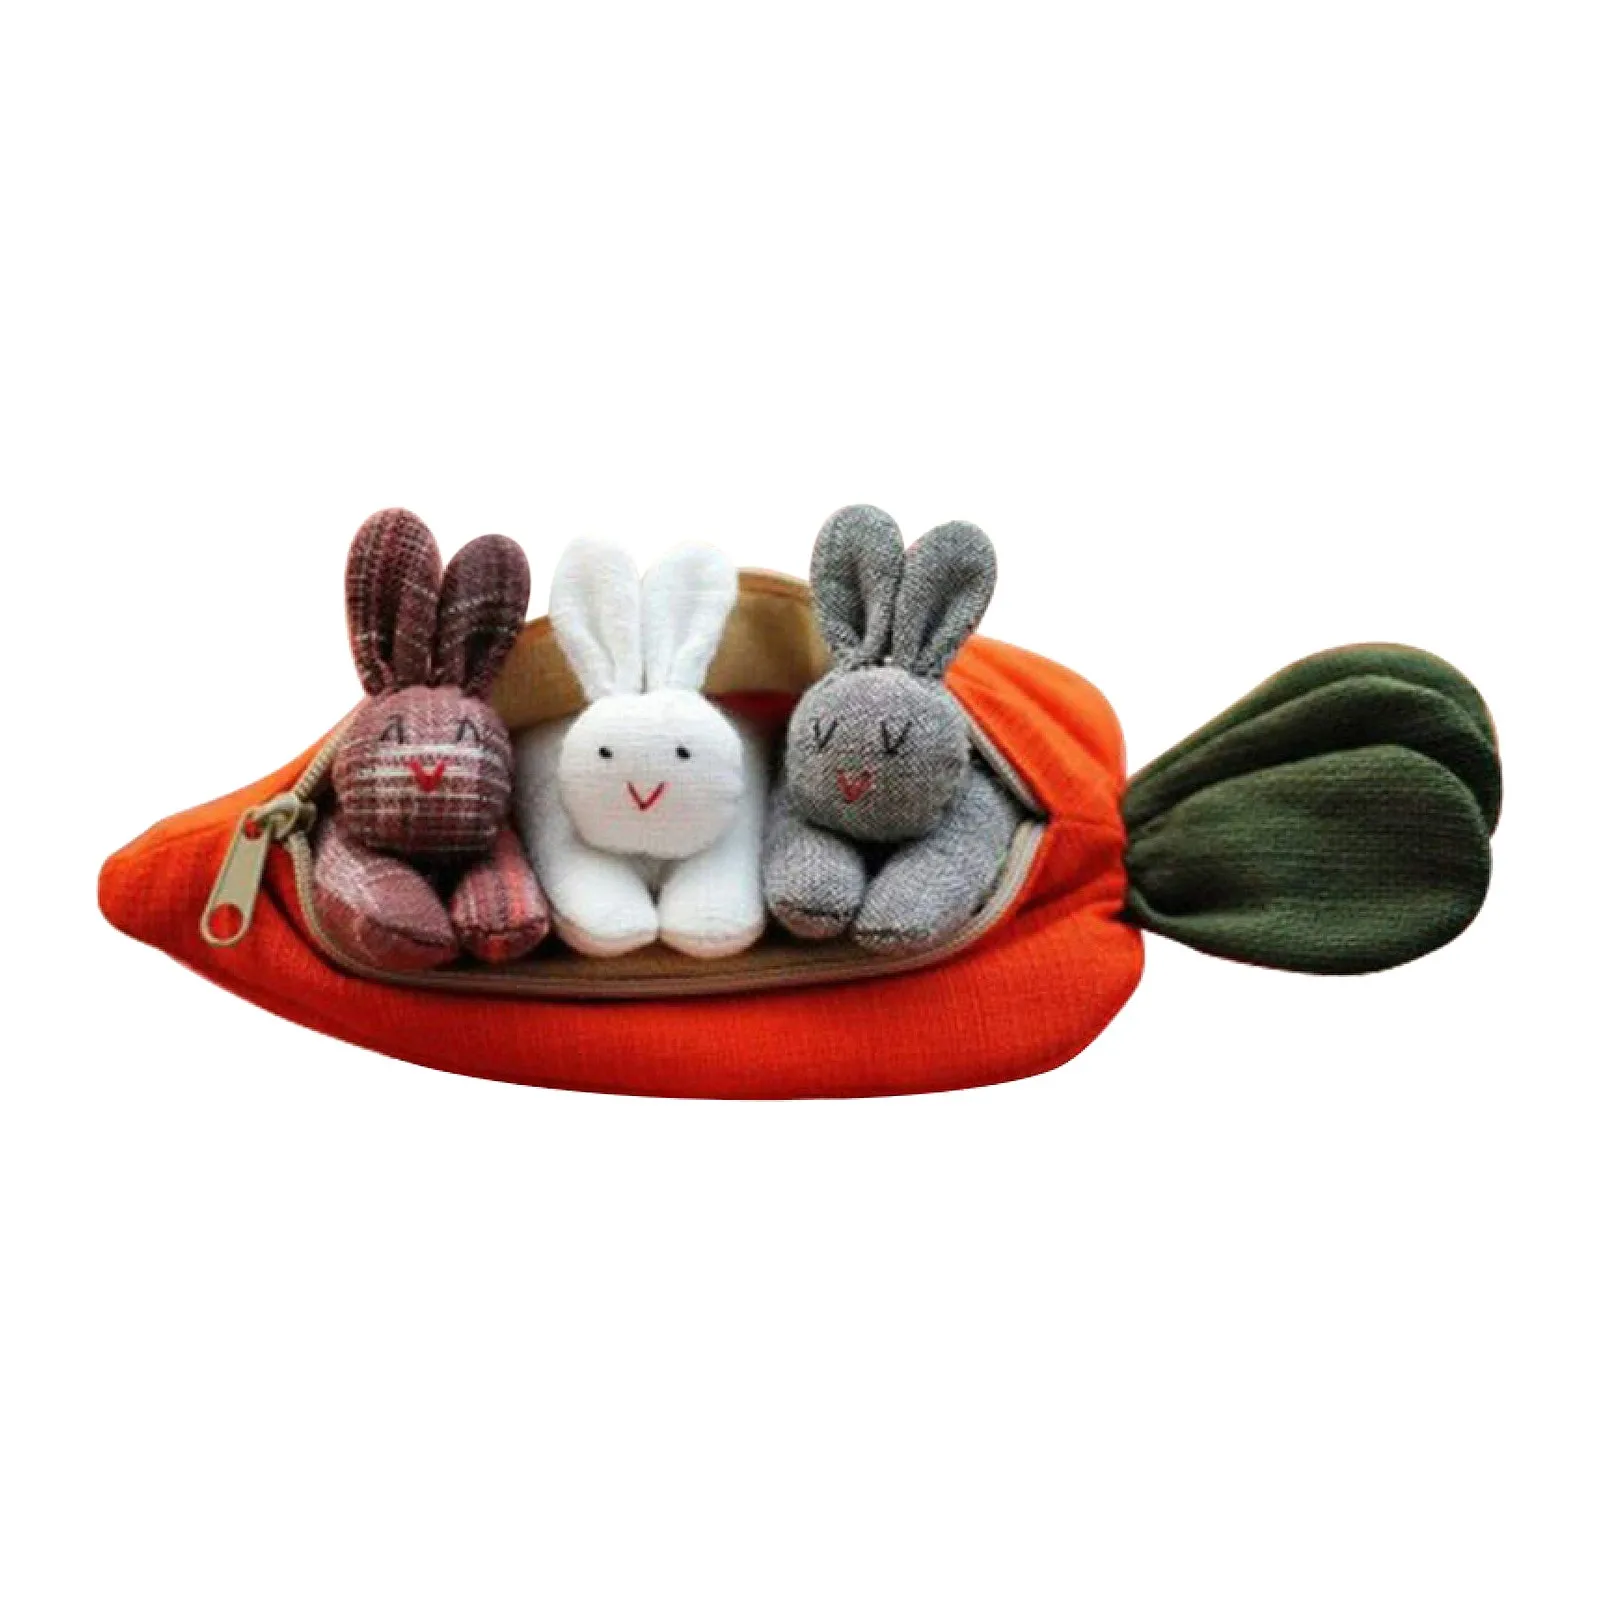 

Childrens Toys Unzip the rabbit doll toy3 bunnies in carrot purse Stuffed toys Mini cute Easter gift bunny doll handmade toys